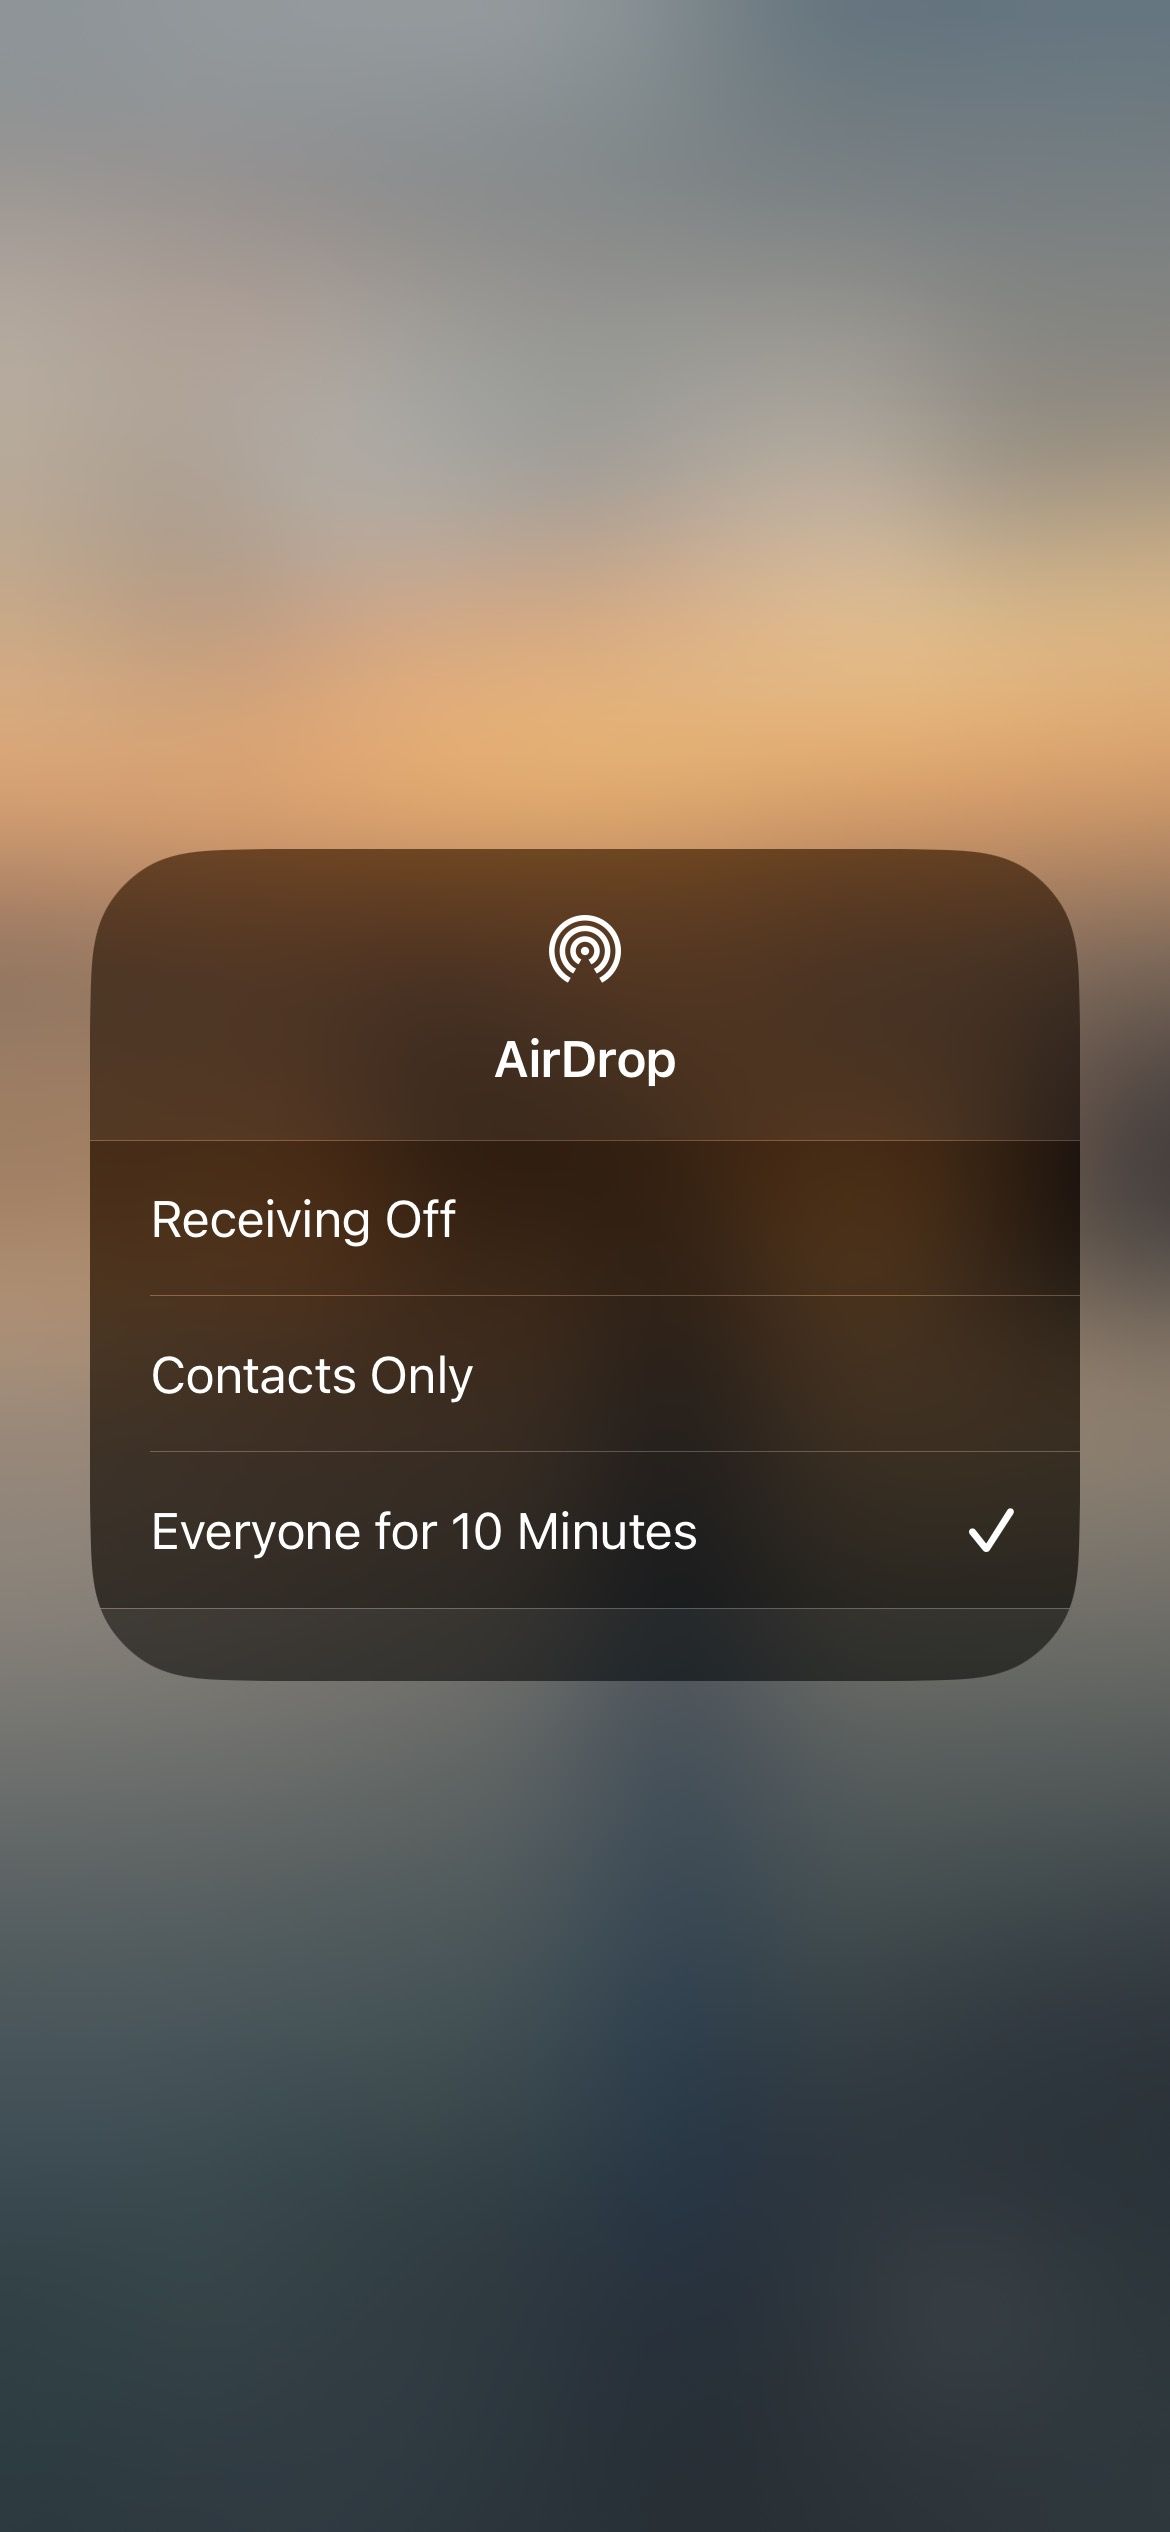 airdrop visibility options in iphone control center